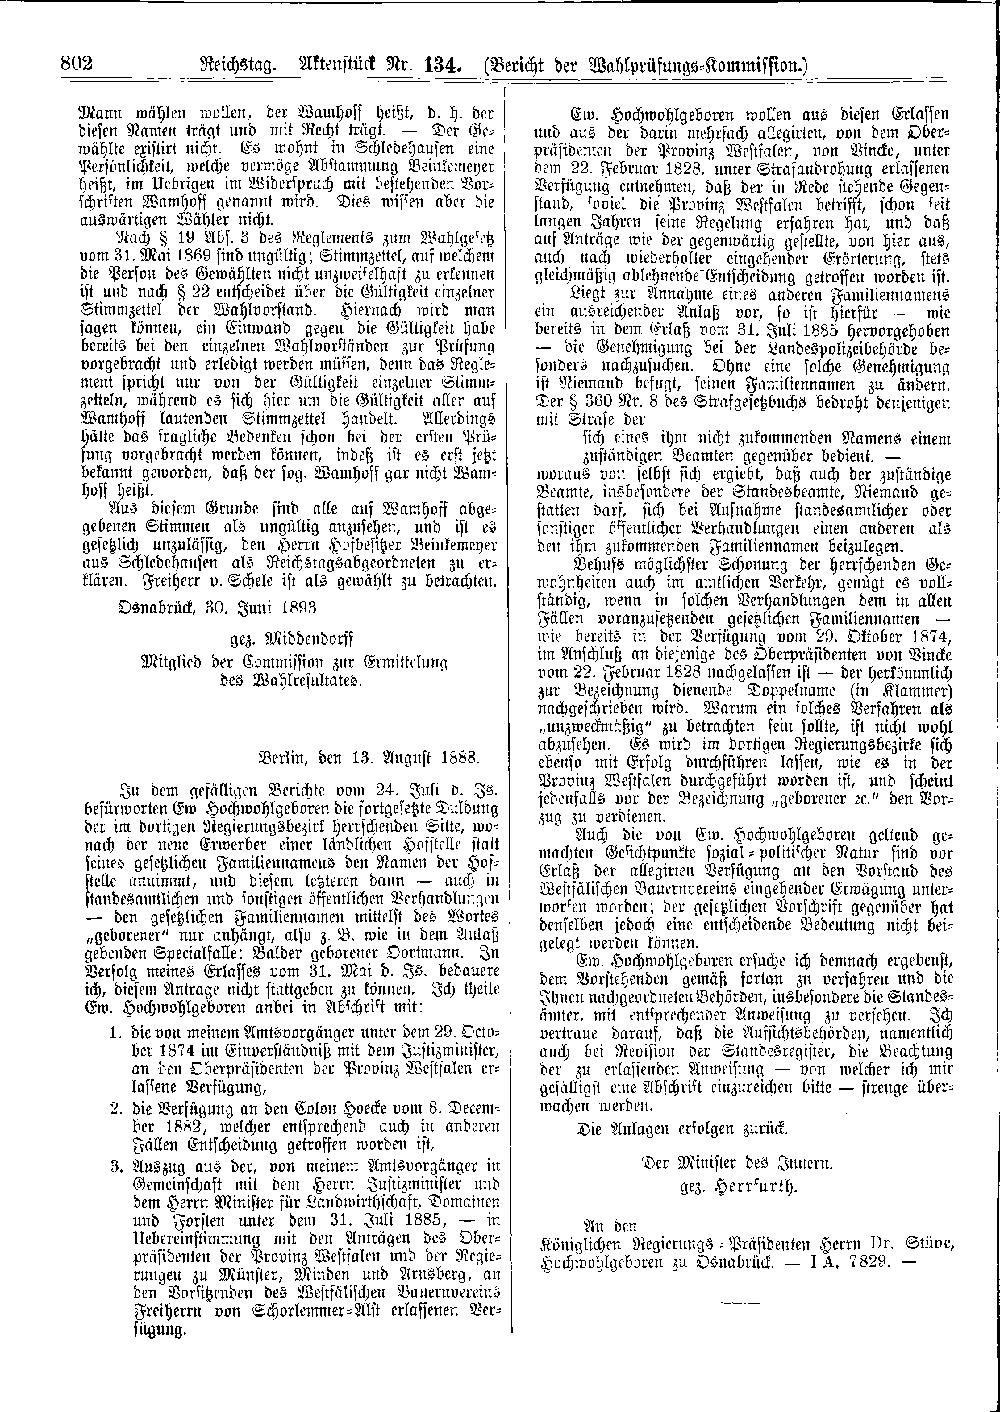 Scan of page 802